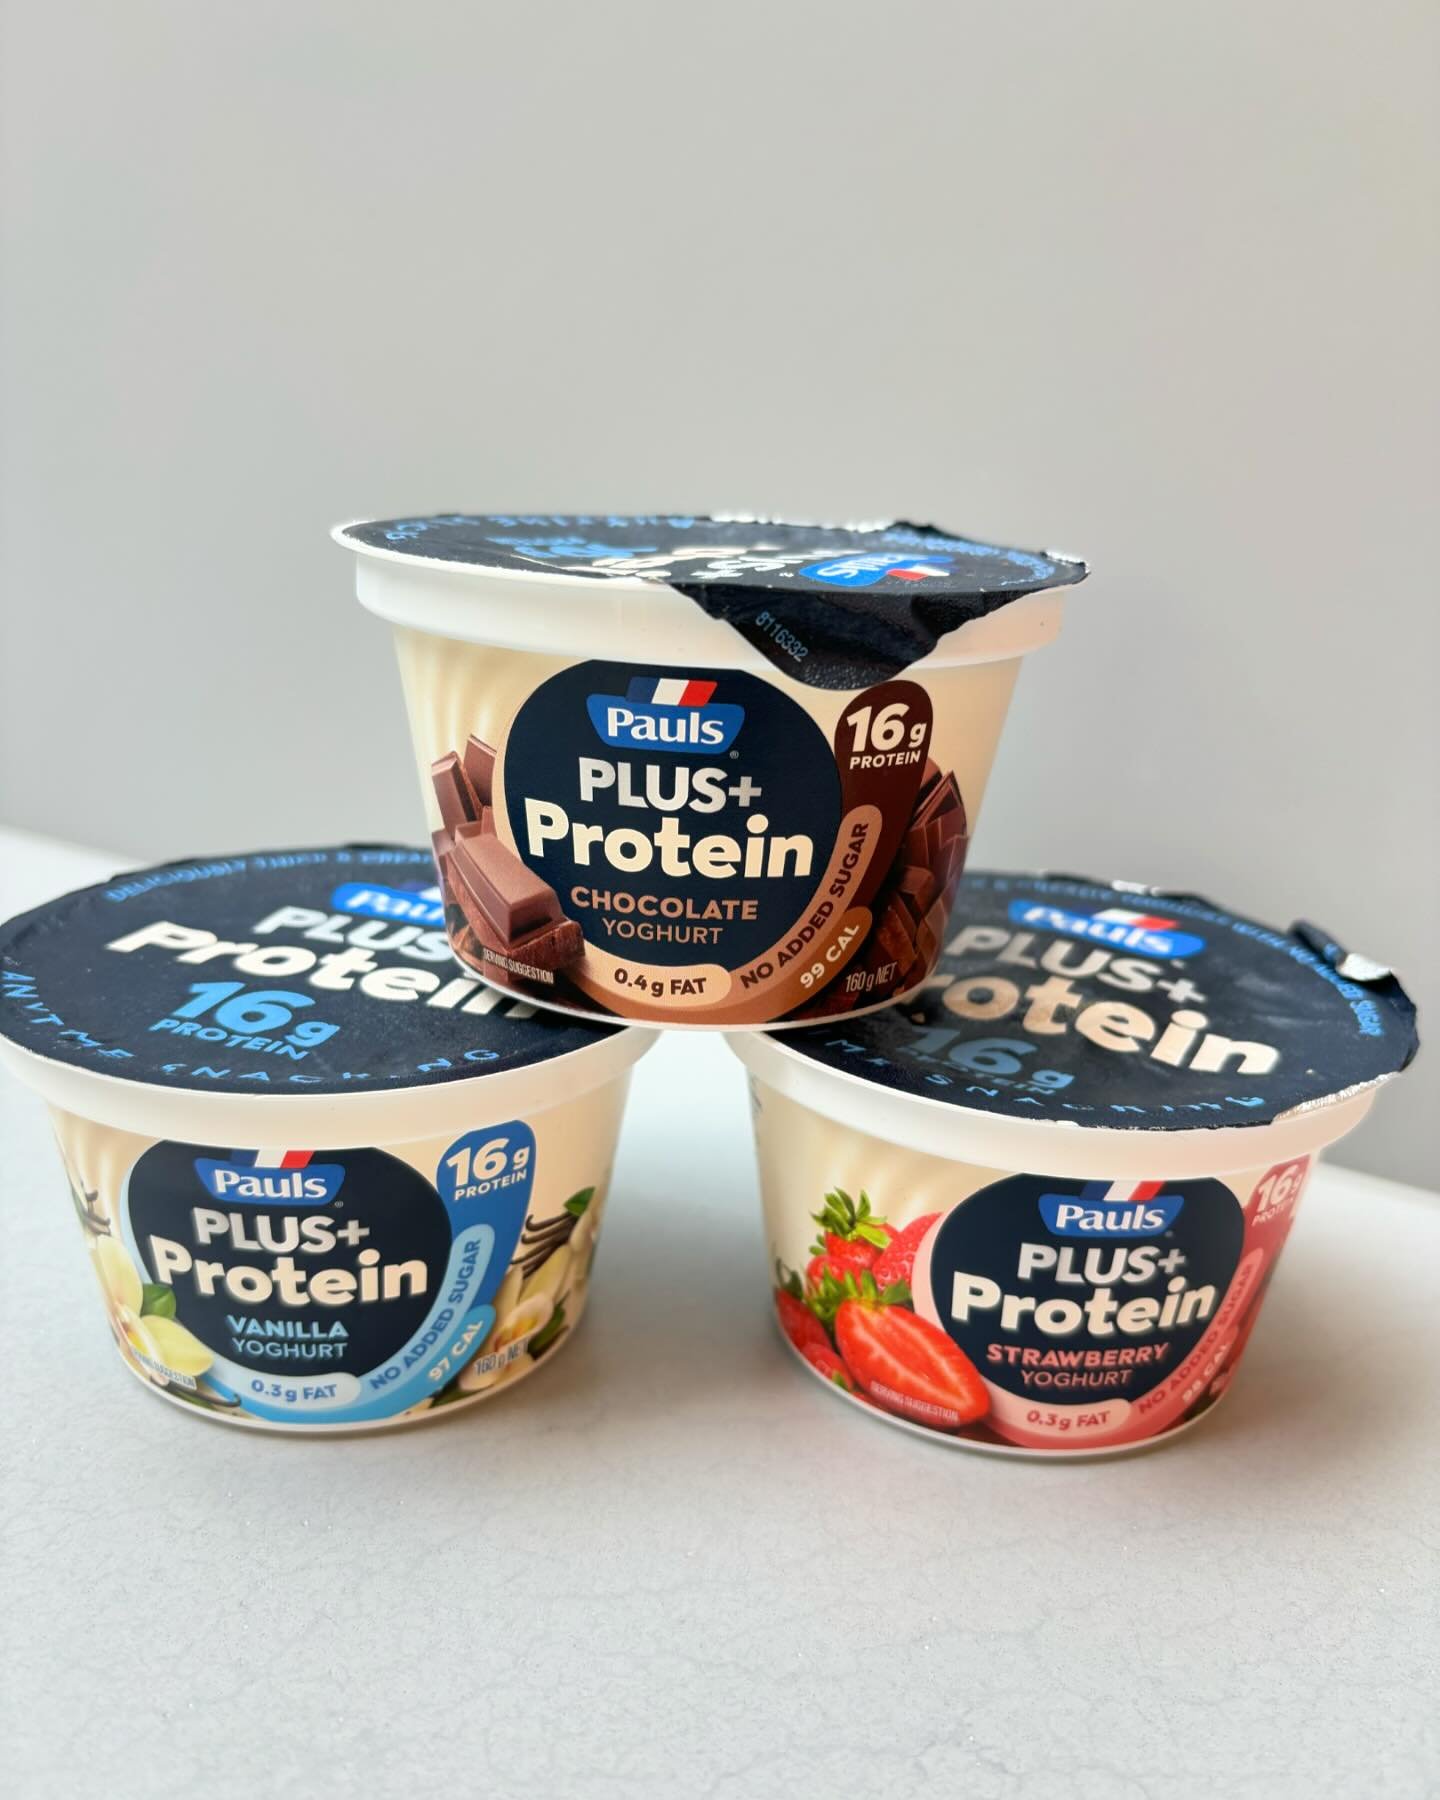 New product alert! Available at Woolworths, the Paul&rsquo;s plus + protein yoghurt comes in 3 flavours. A perfect addition to breakfast or as a simple and satiating morning or afternoon tea. #newproduct #yoghurt #highprotein #lowcarb #calcium #snack